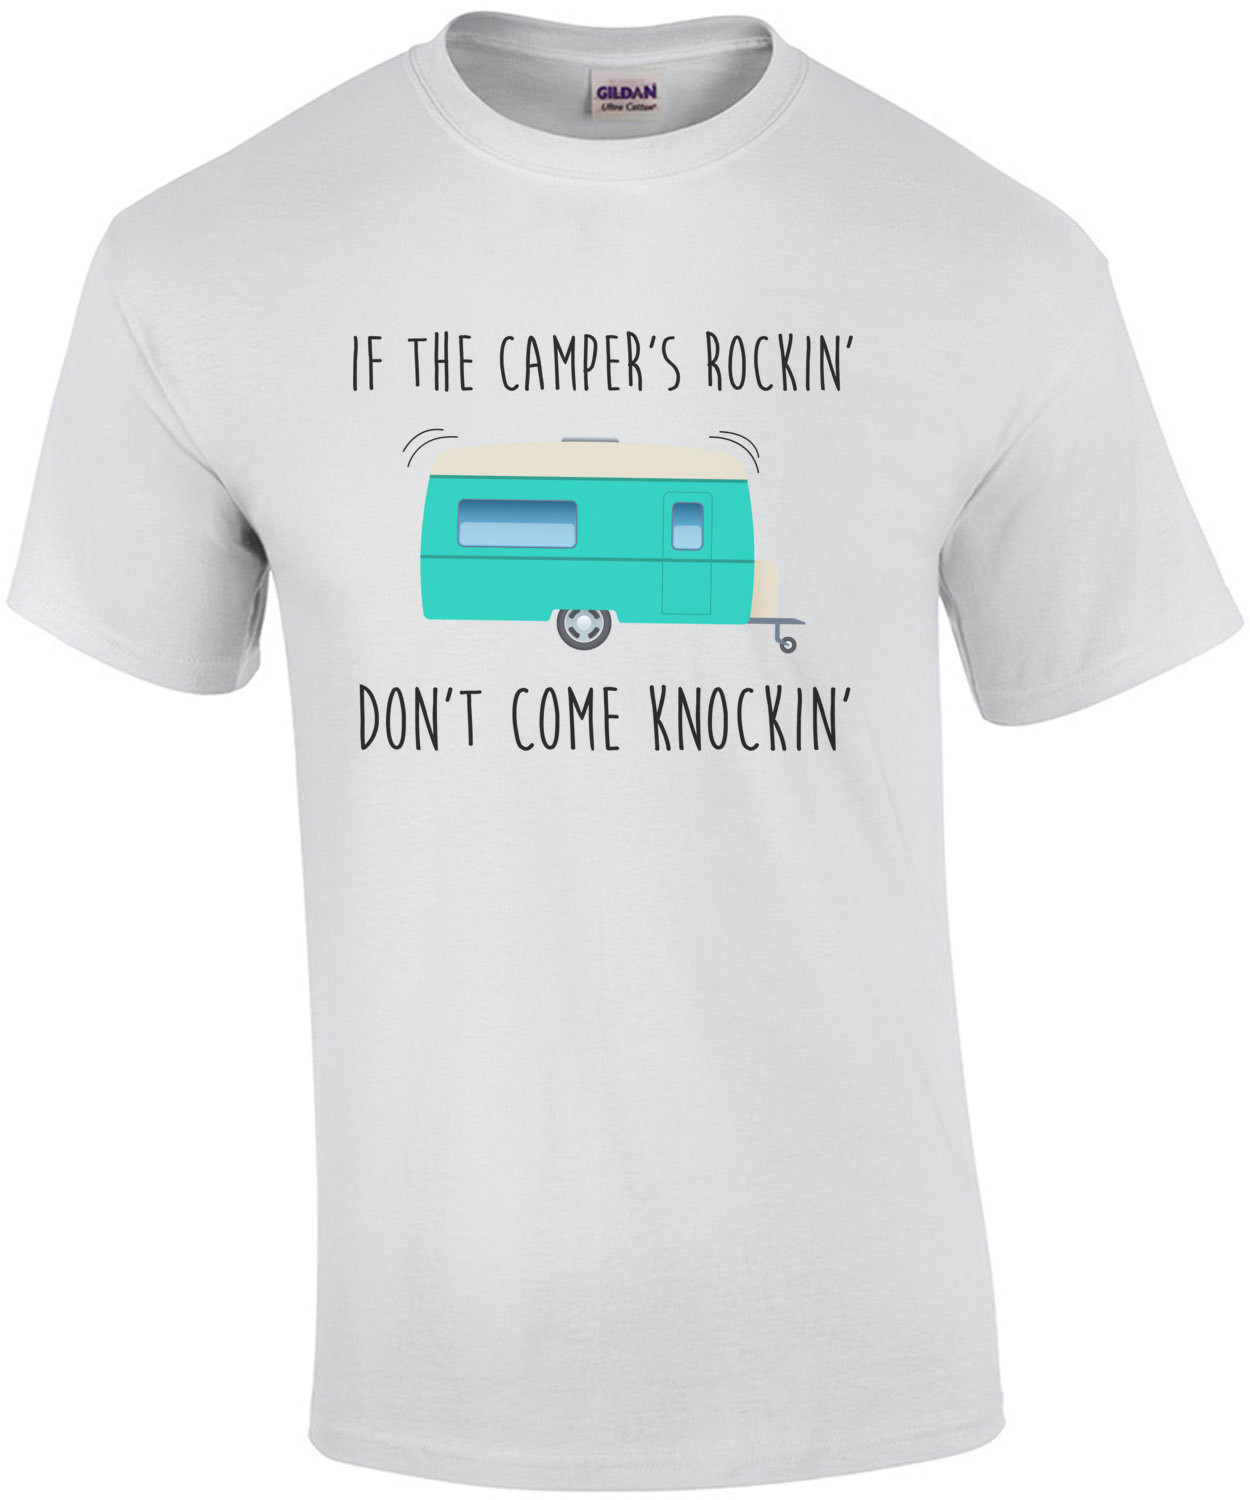 If the camper's rockin' - don't come knockin' - funny camping t-shirt